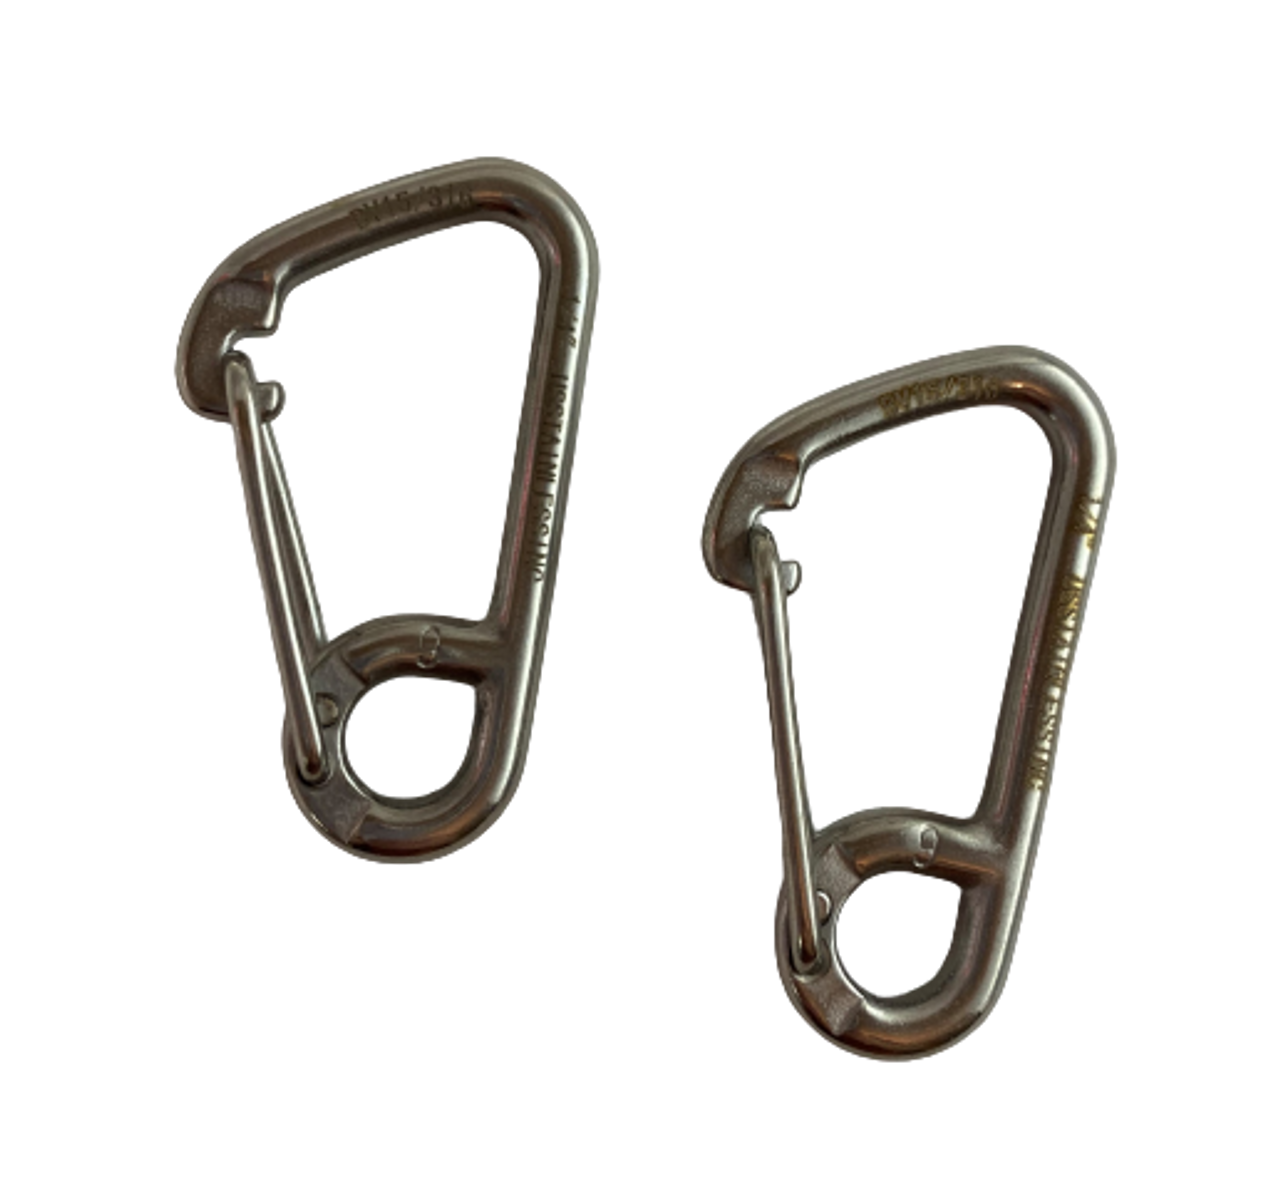 Stainless Steel Spring Clip 6mm